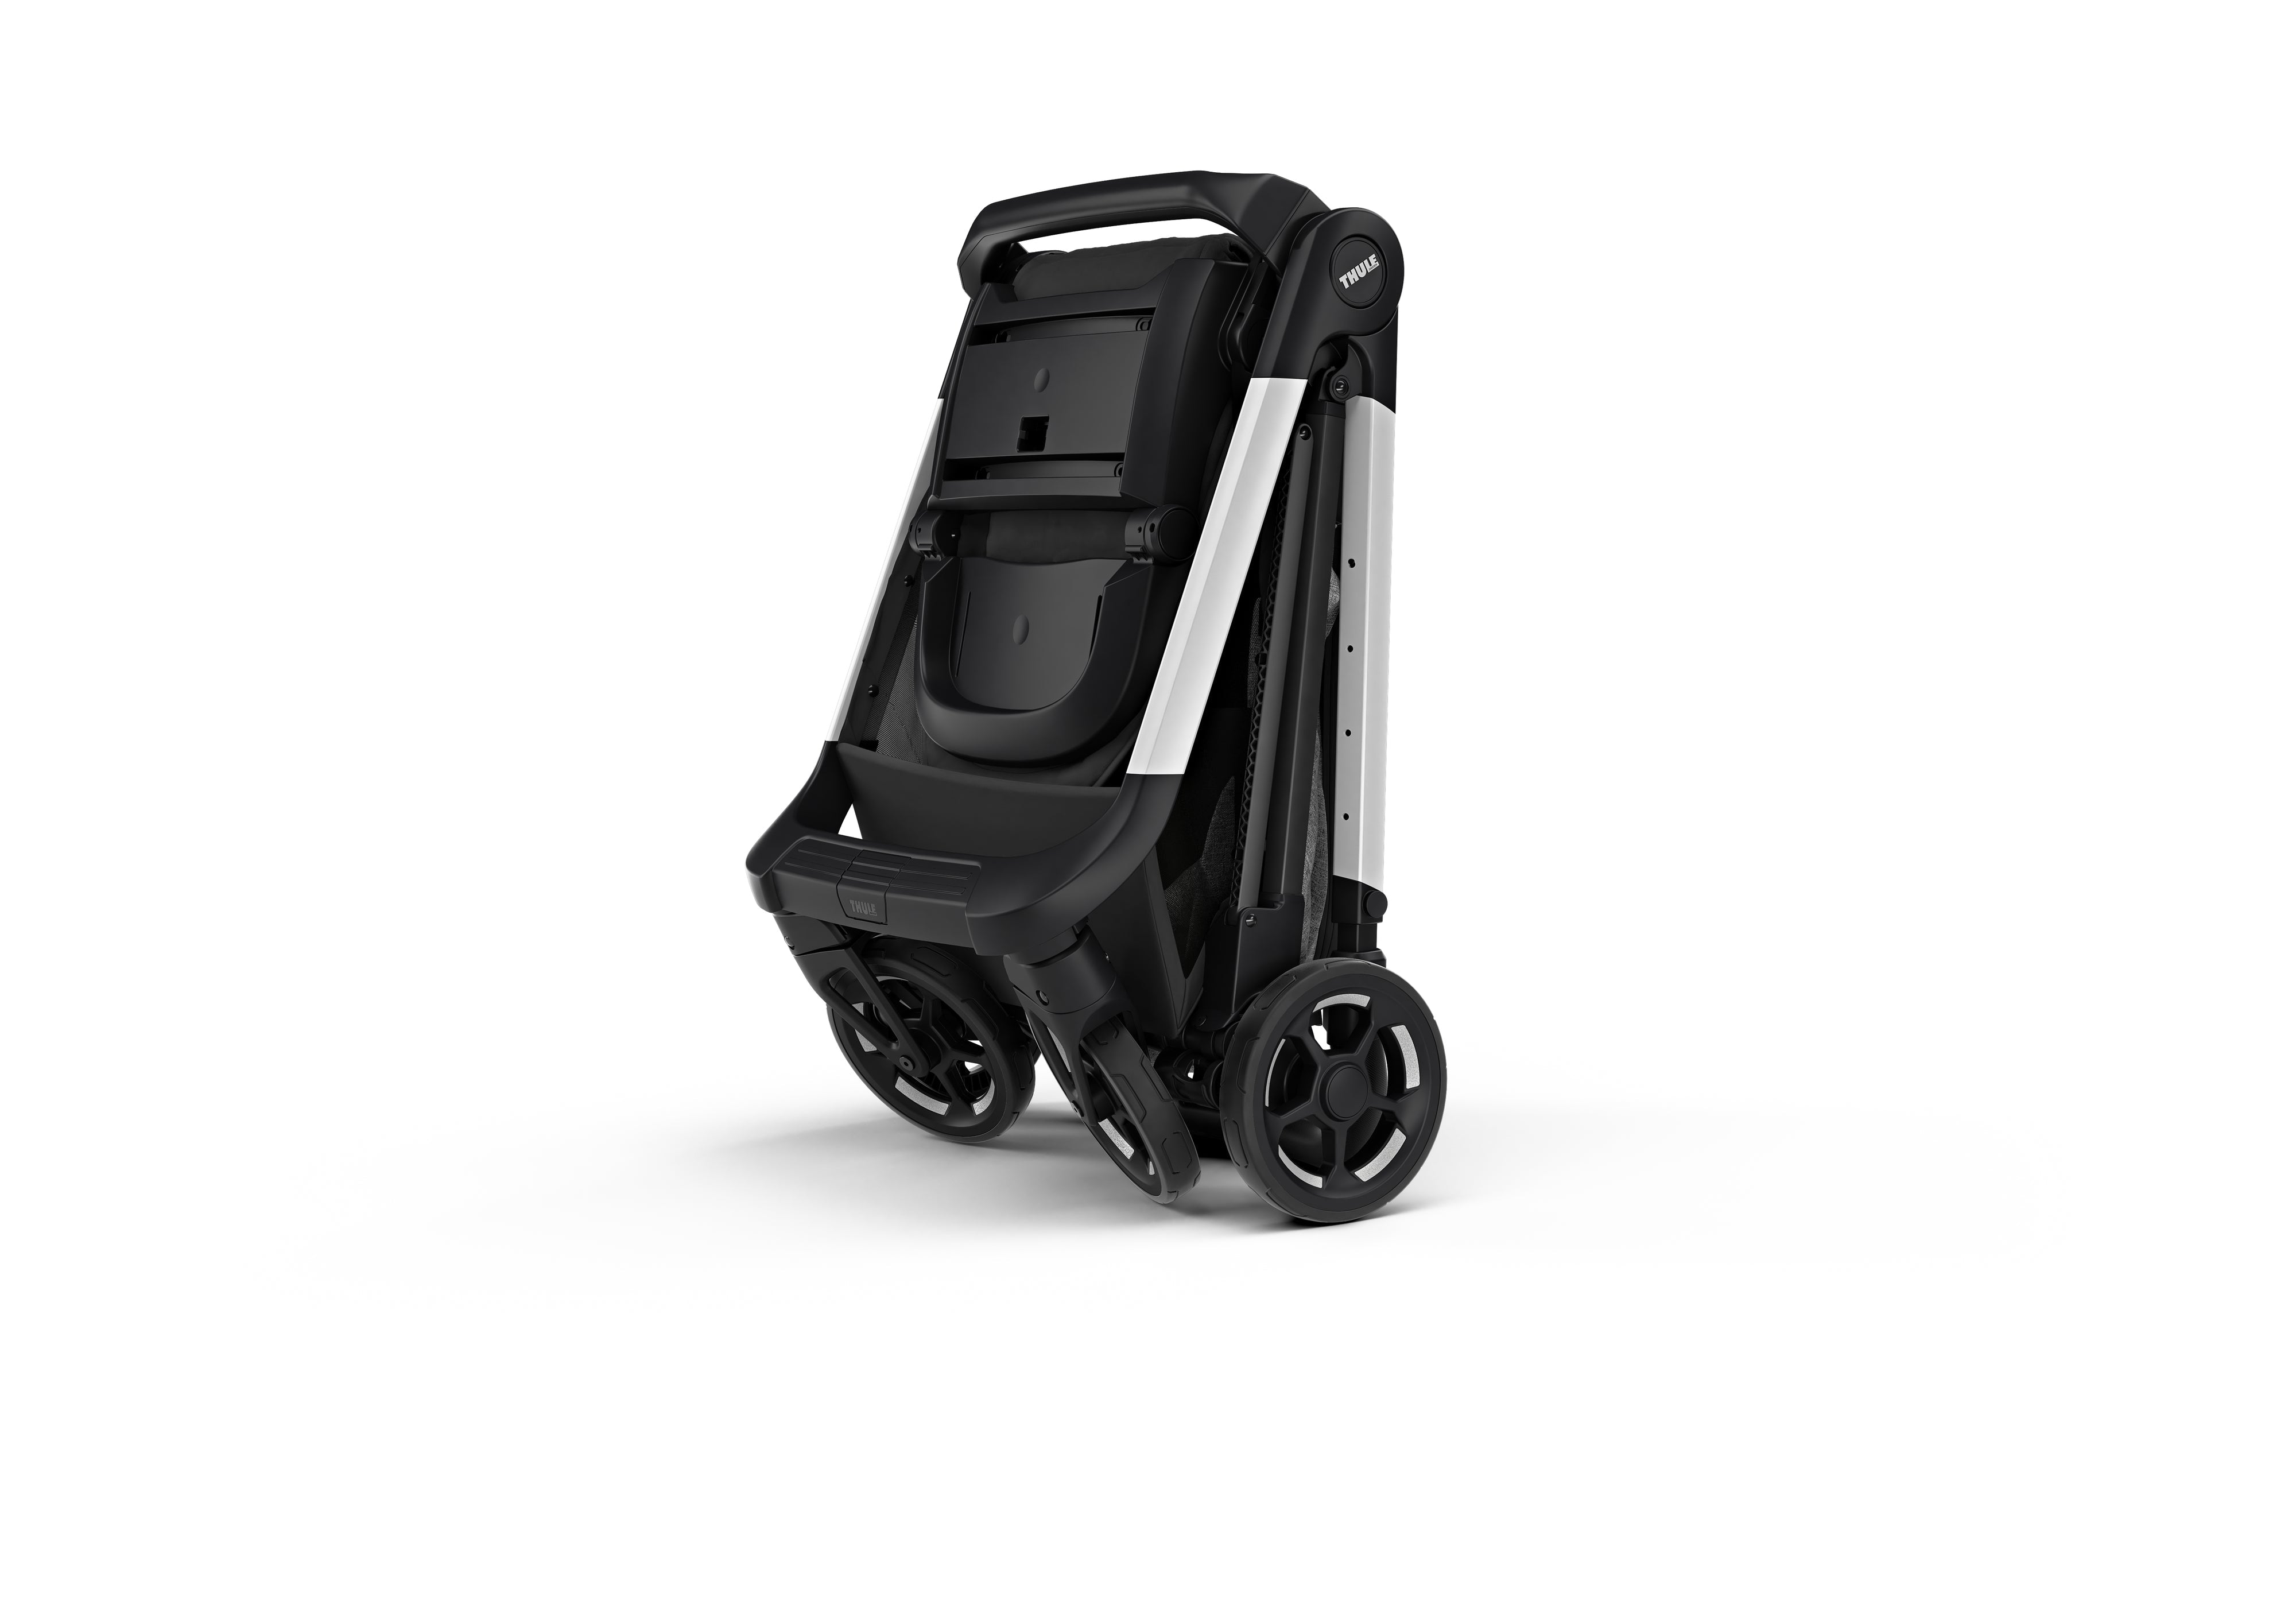 Thule Shine: Reversible & Compact City Stroller